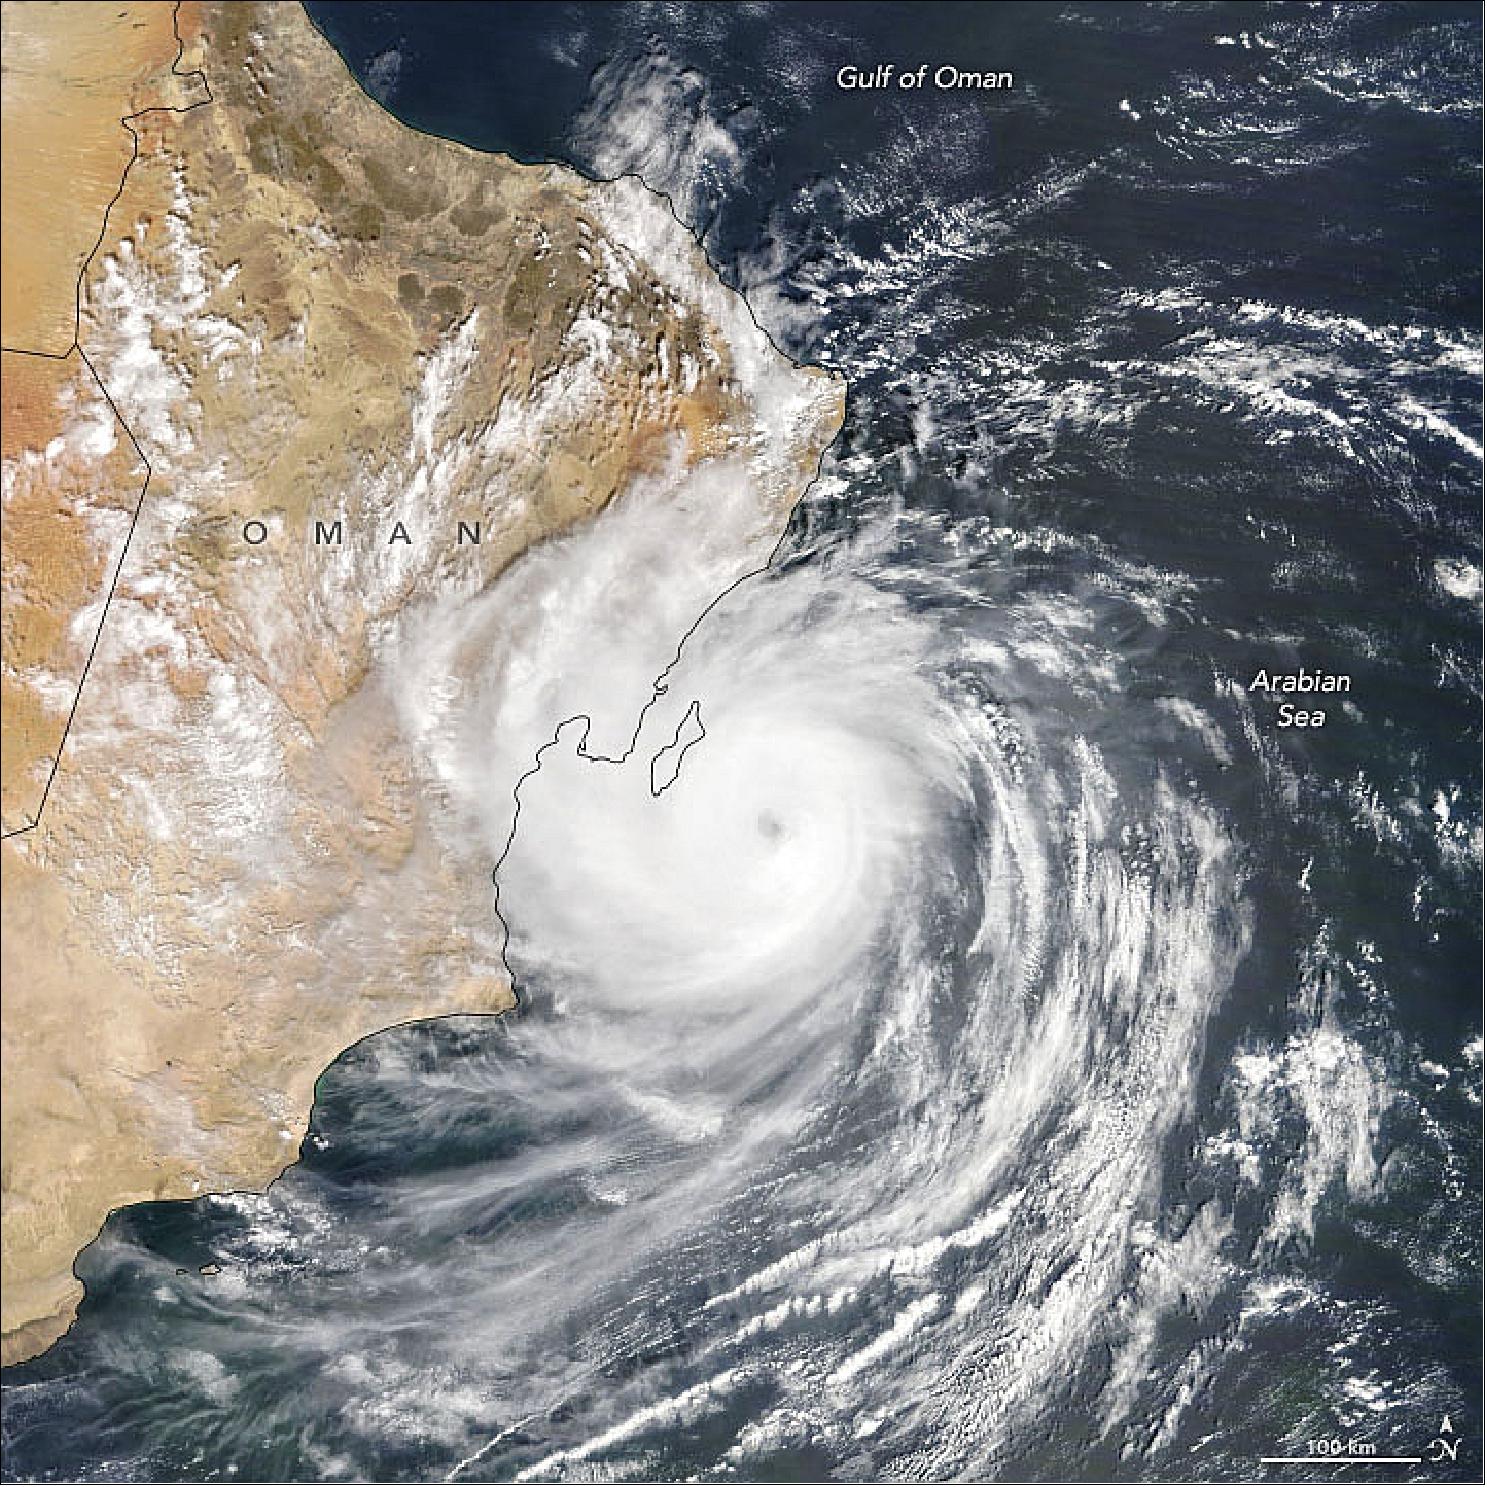 Figure 16: MODIS on NASA’s Terra satellite acquired this image at 10:45 a.m. Gulf Standard Time (06:45 Universal Time) on 24 September 2019 as the storm’s outer bands moved over Oman. Later that day, the India Meteorological Department reported maximum winds between 120-130 km/hr. That’s the equivalent of a category 1 storm on the Saffir-Simpson wind scale (image credit: NASA Earth Observatory image by Joshua Stevens, using MODIS data from NASA EOSDIS/LANCE and GIBS/Worldview. Story by Kathryn Hansen)